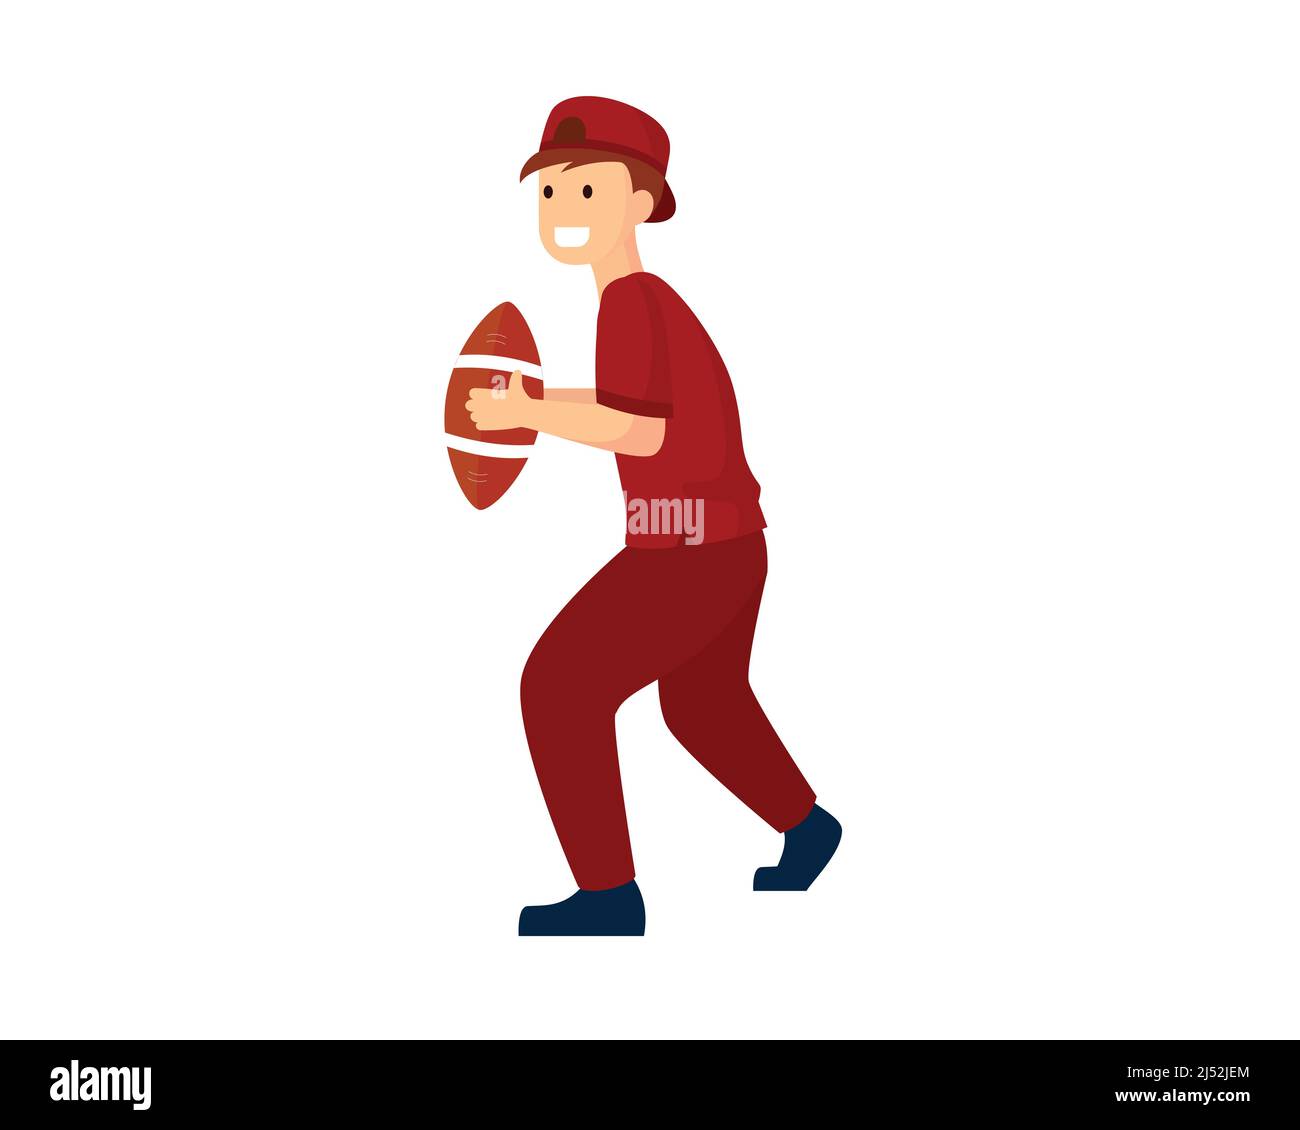 a Boy Holding Rugby Ball with Ready to Throw Gesture Illustration Vector Stock Vector